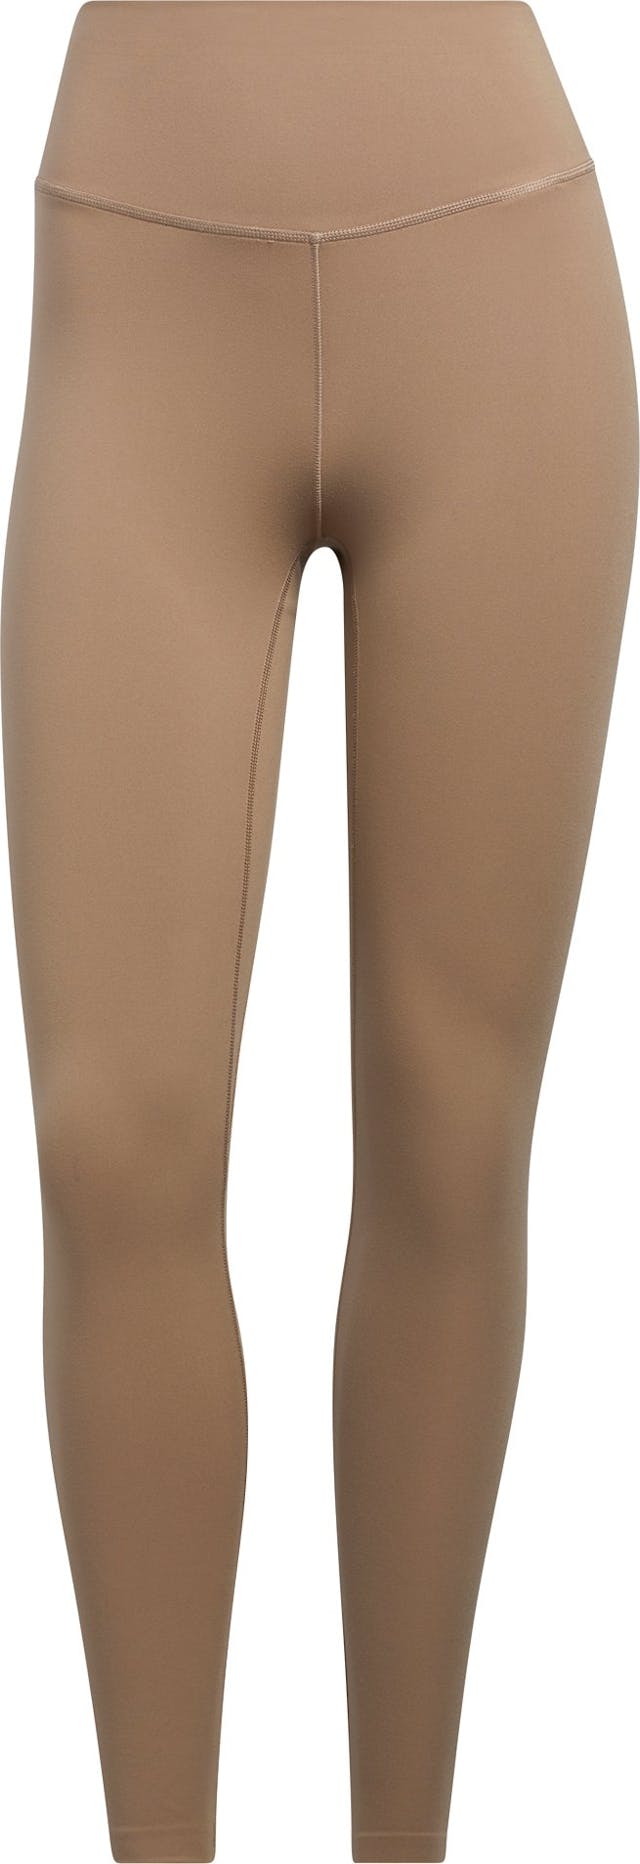 Product image for Yoga Luxe Studio 7/8 Tights - Women's